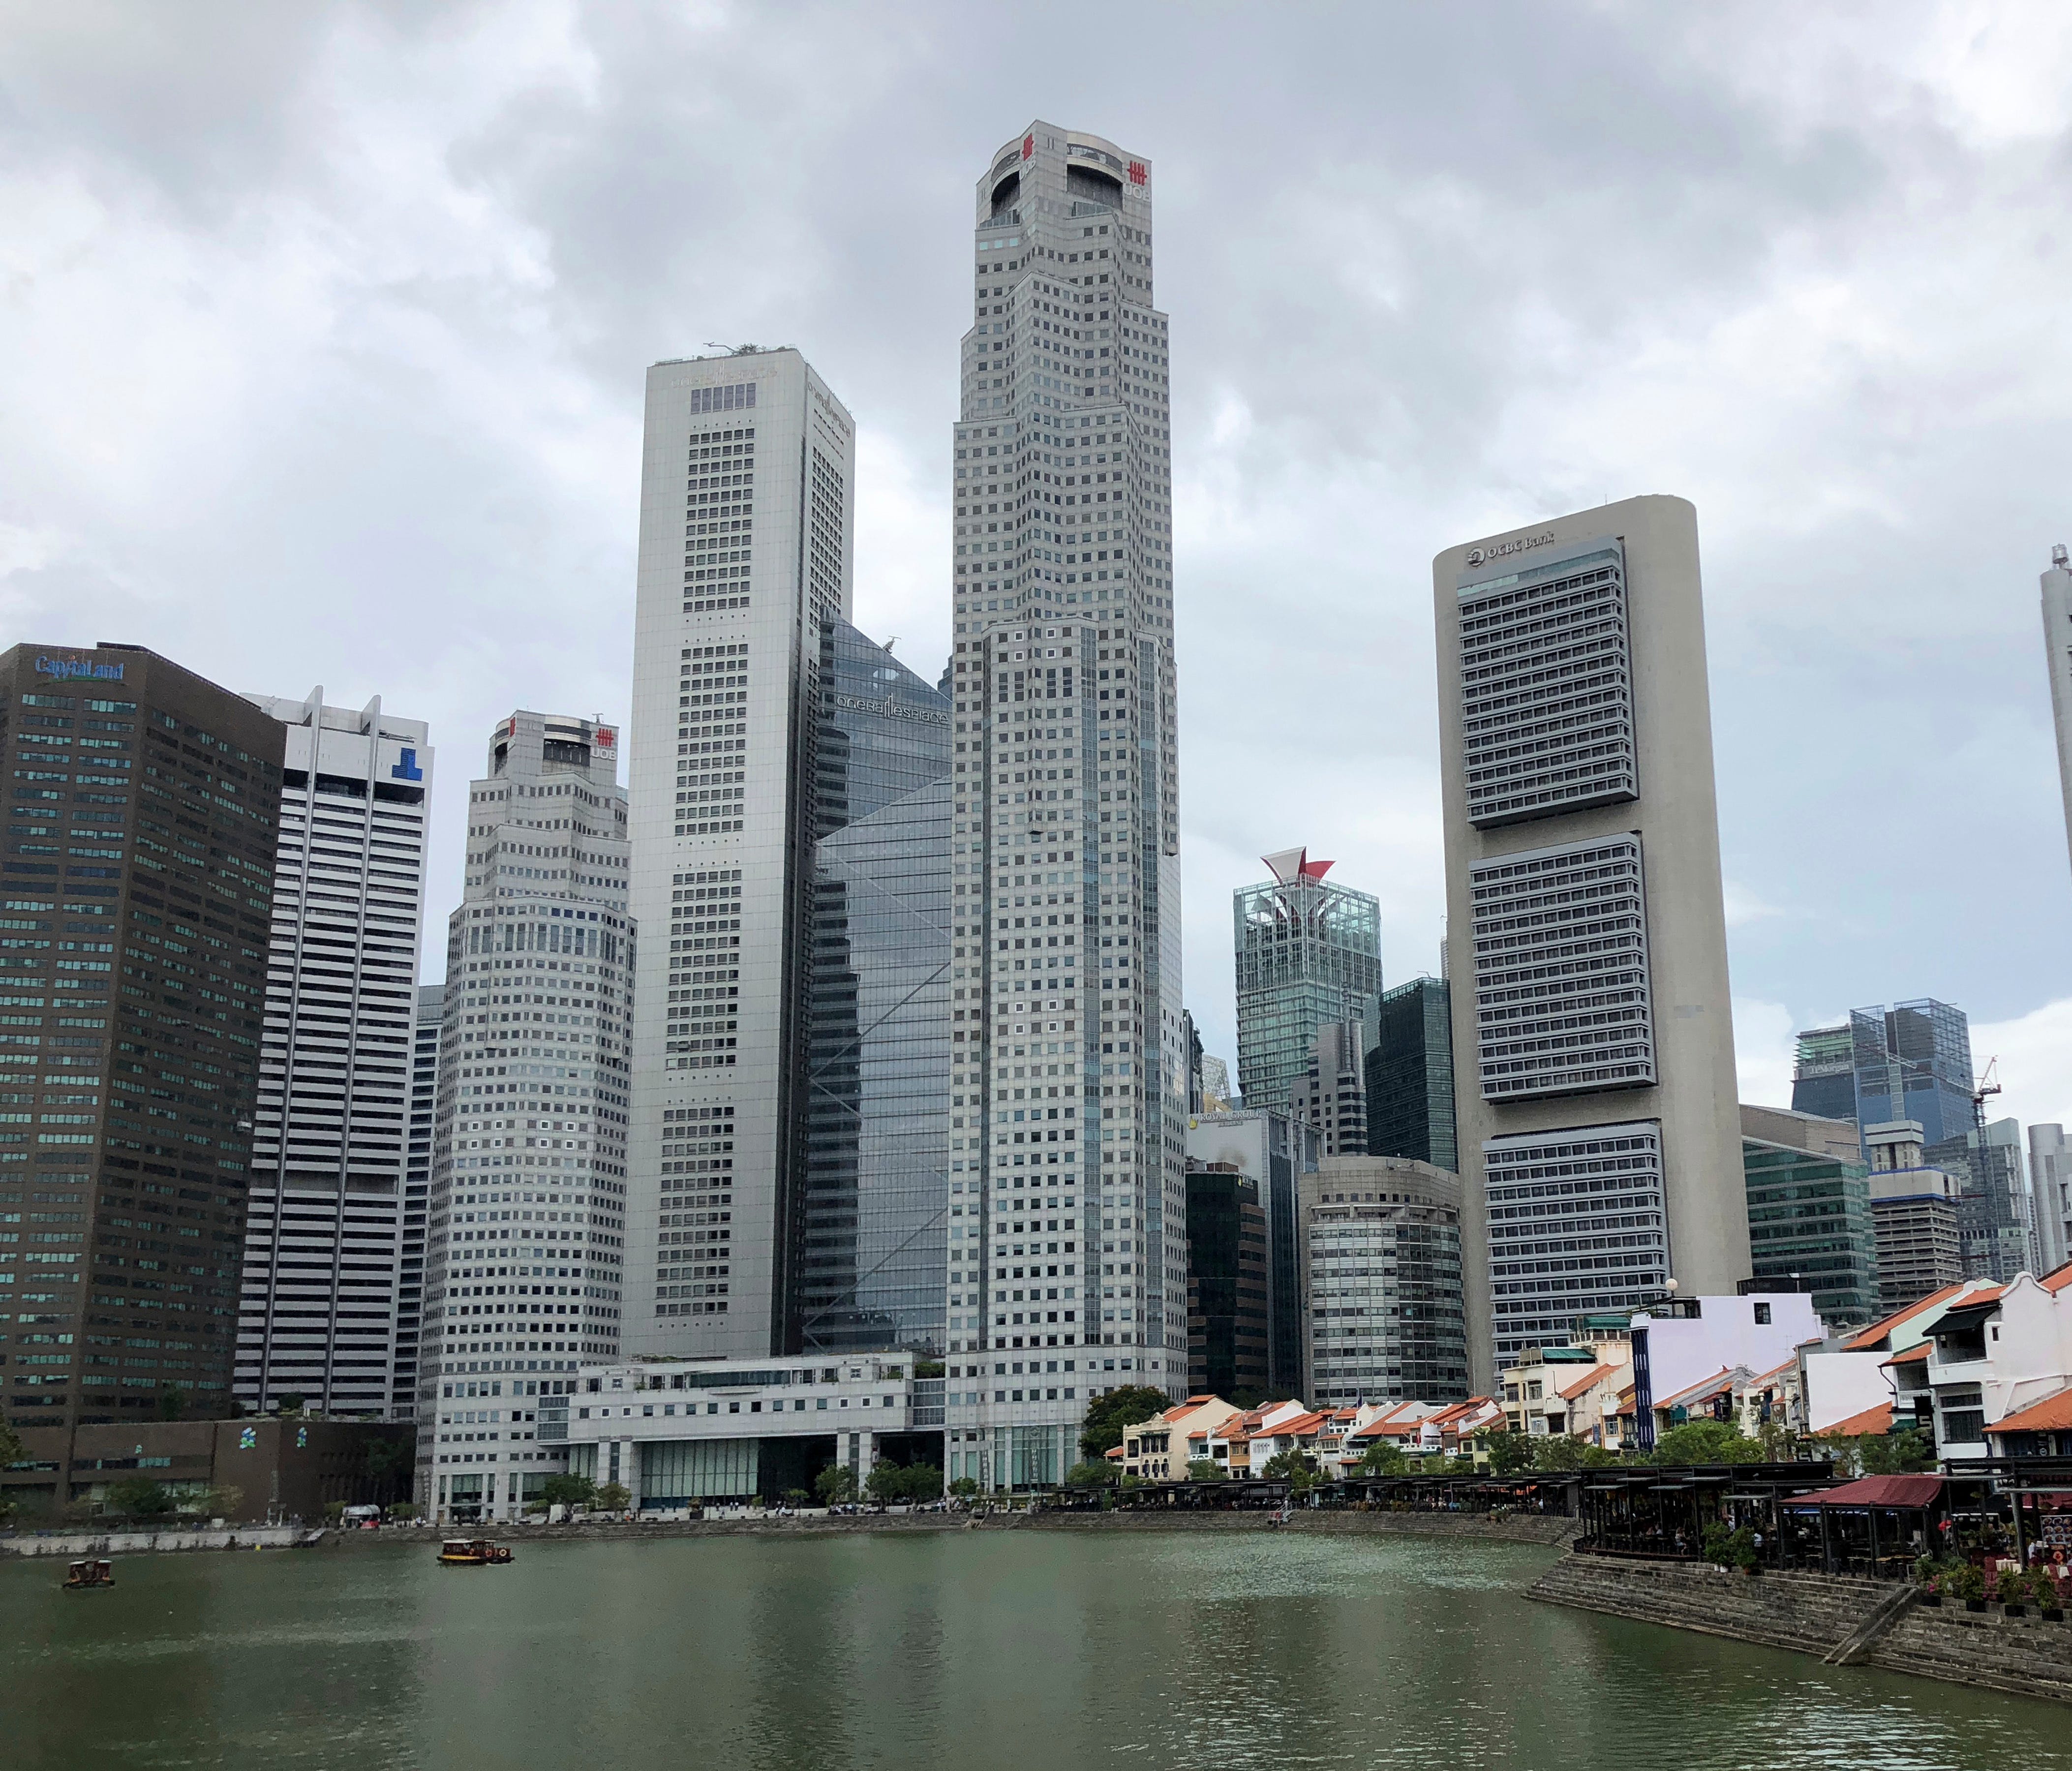 Singapore's financial skyline is seen lining the edge of the Singapore River on Thursday, May 10, 2018, in Singapore.